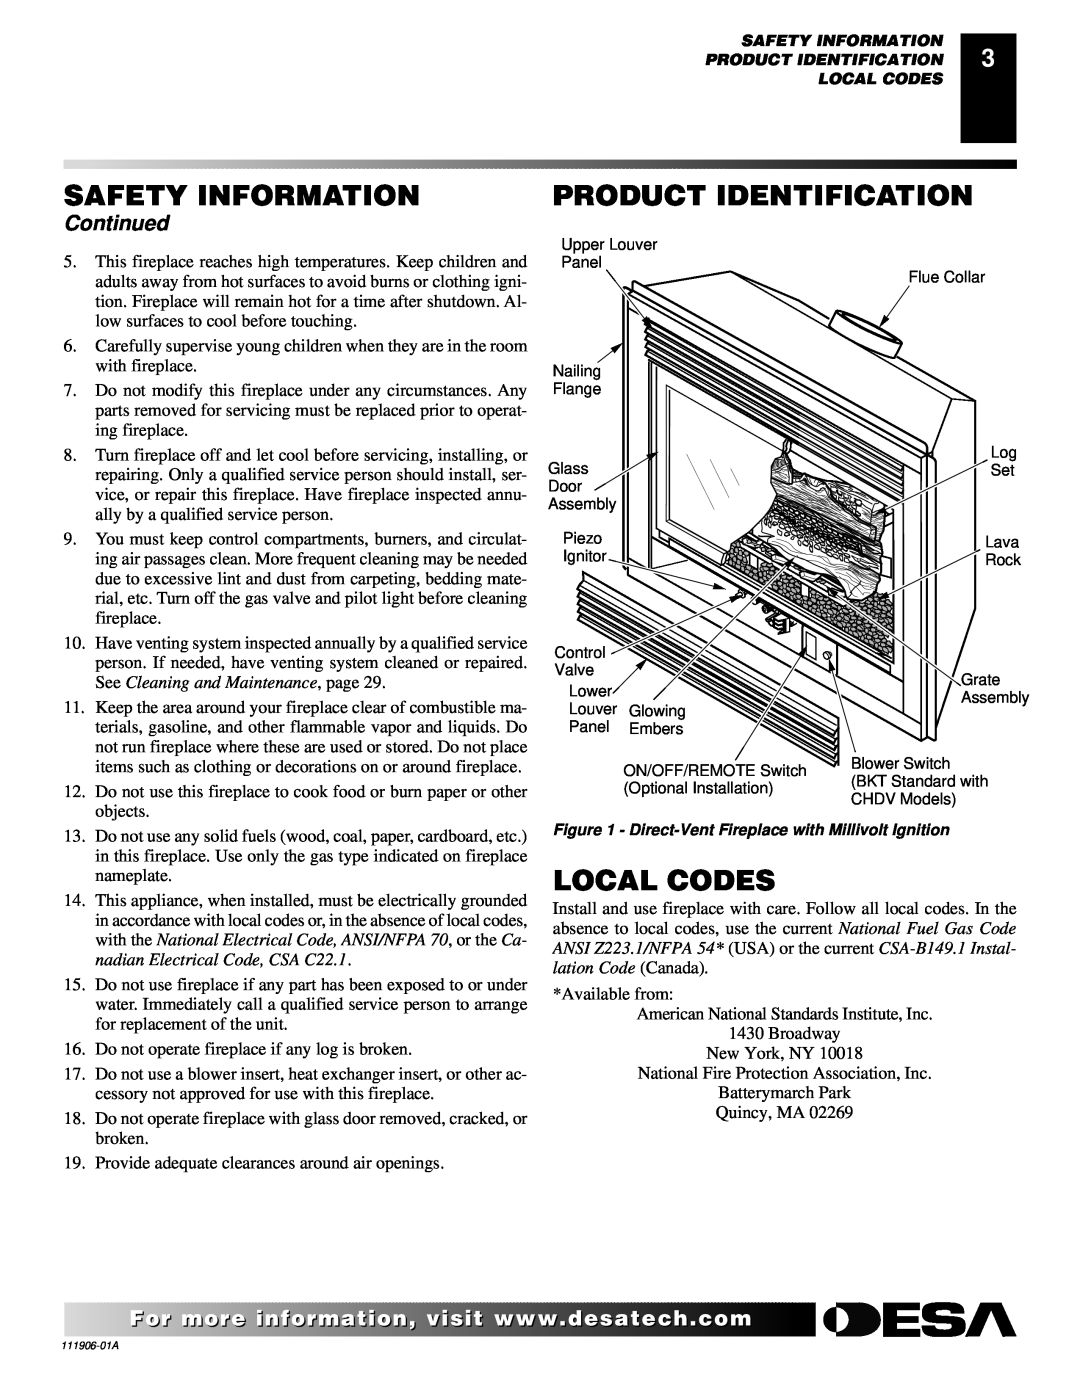 Desa (V)V42NA(1) Product Identification, Local Codes, Continued, Safety Information, See Cleaning and Maintenance, page 